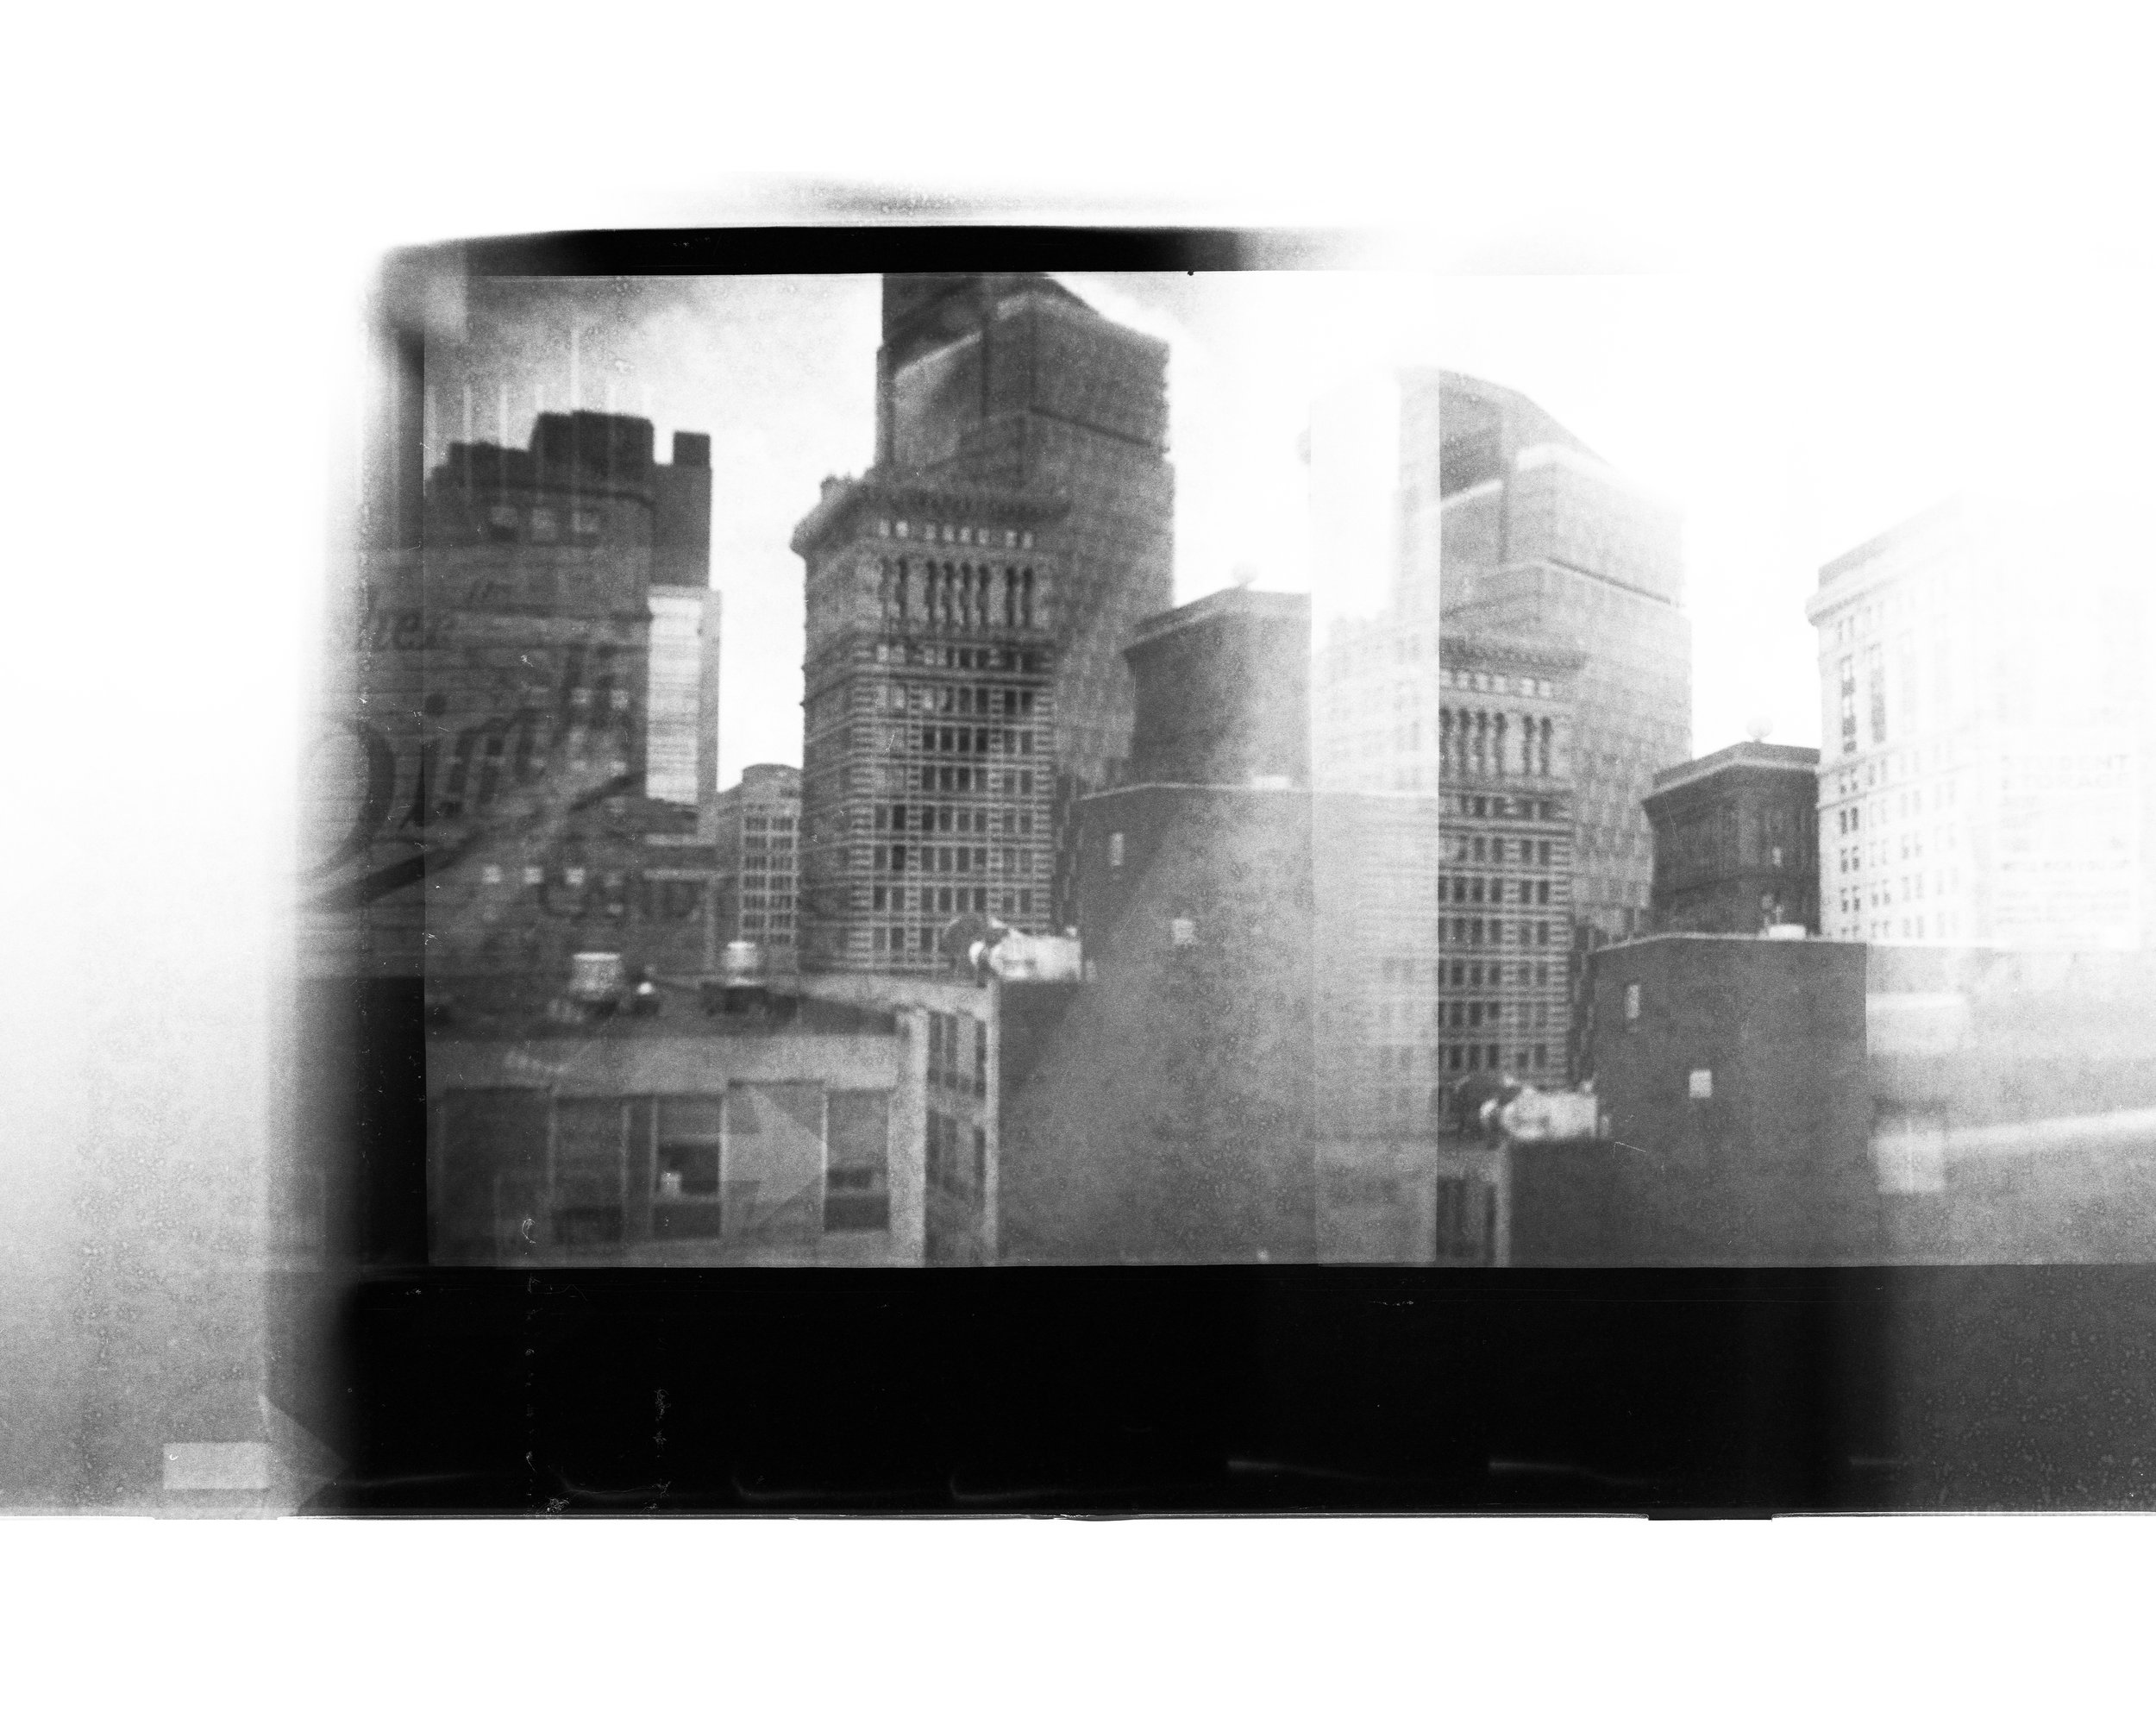   From Here  B&amp;W Photograph Ilford HP5 Diana Camera 